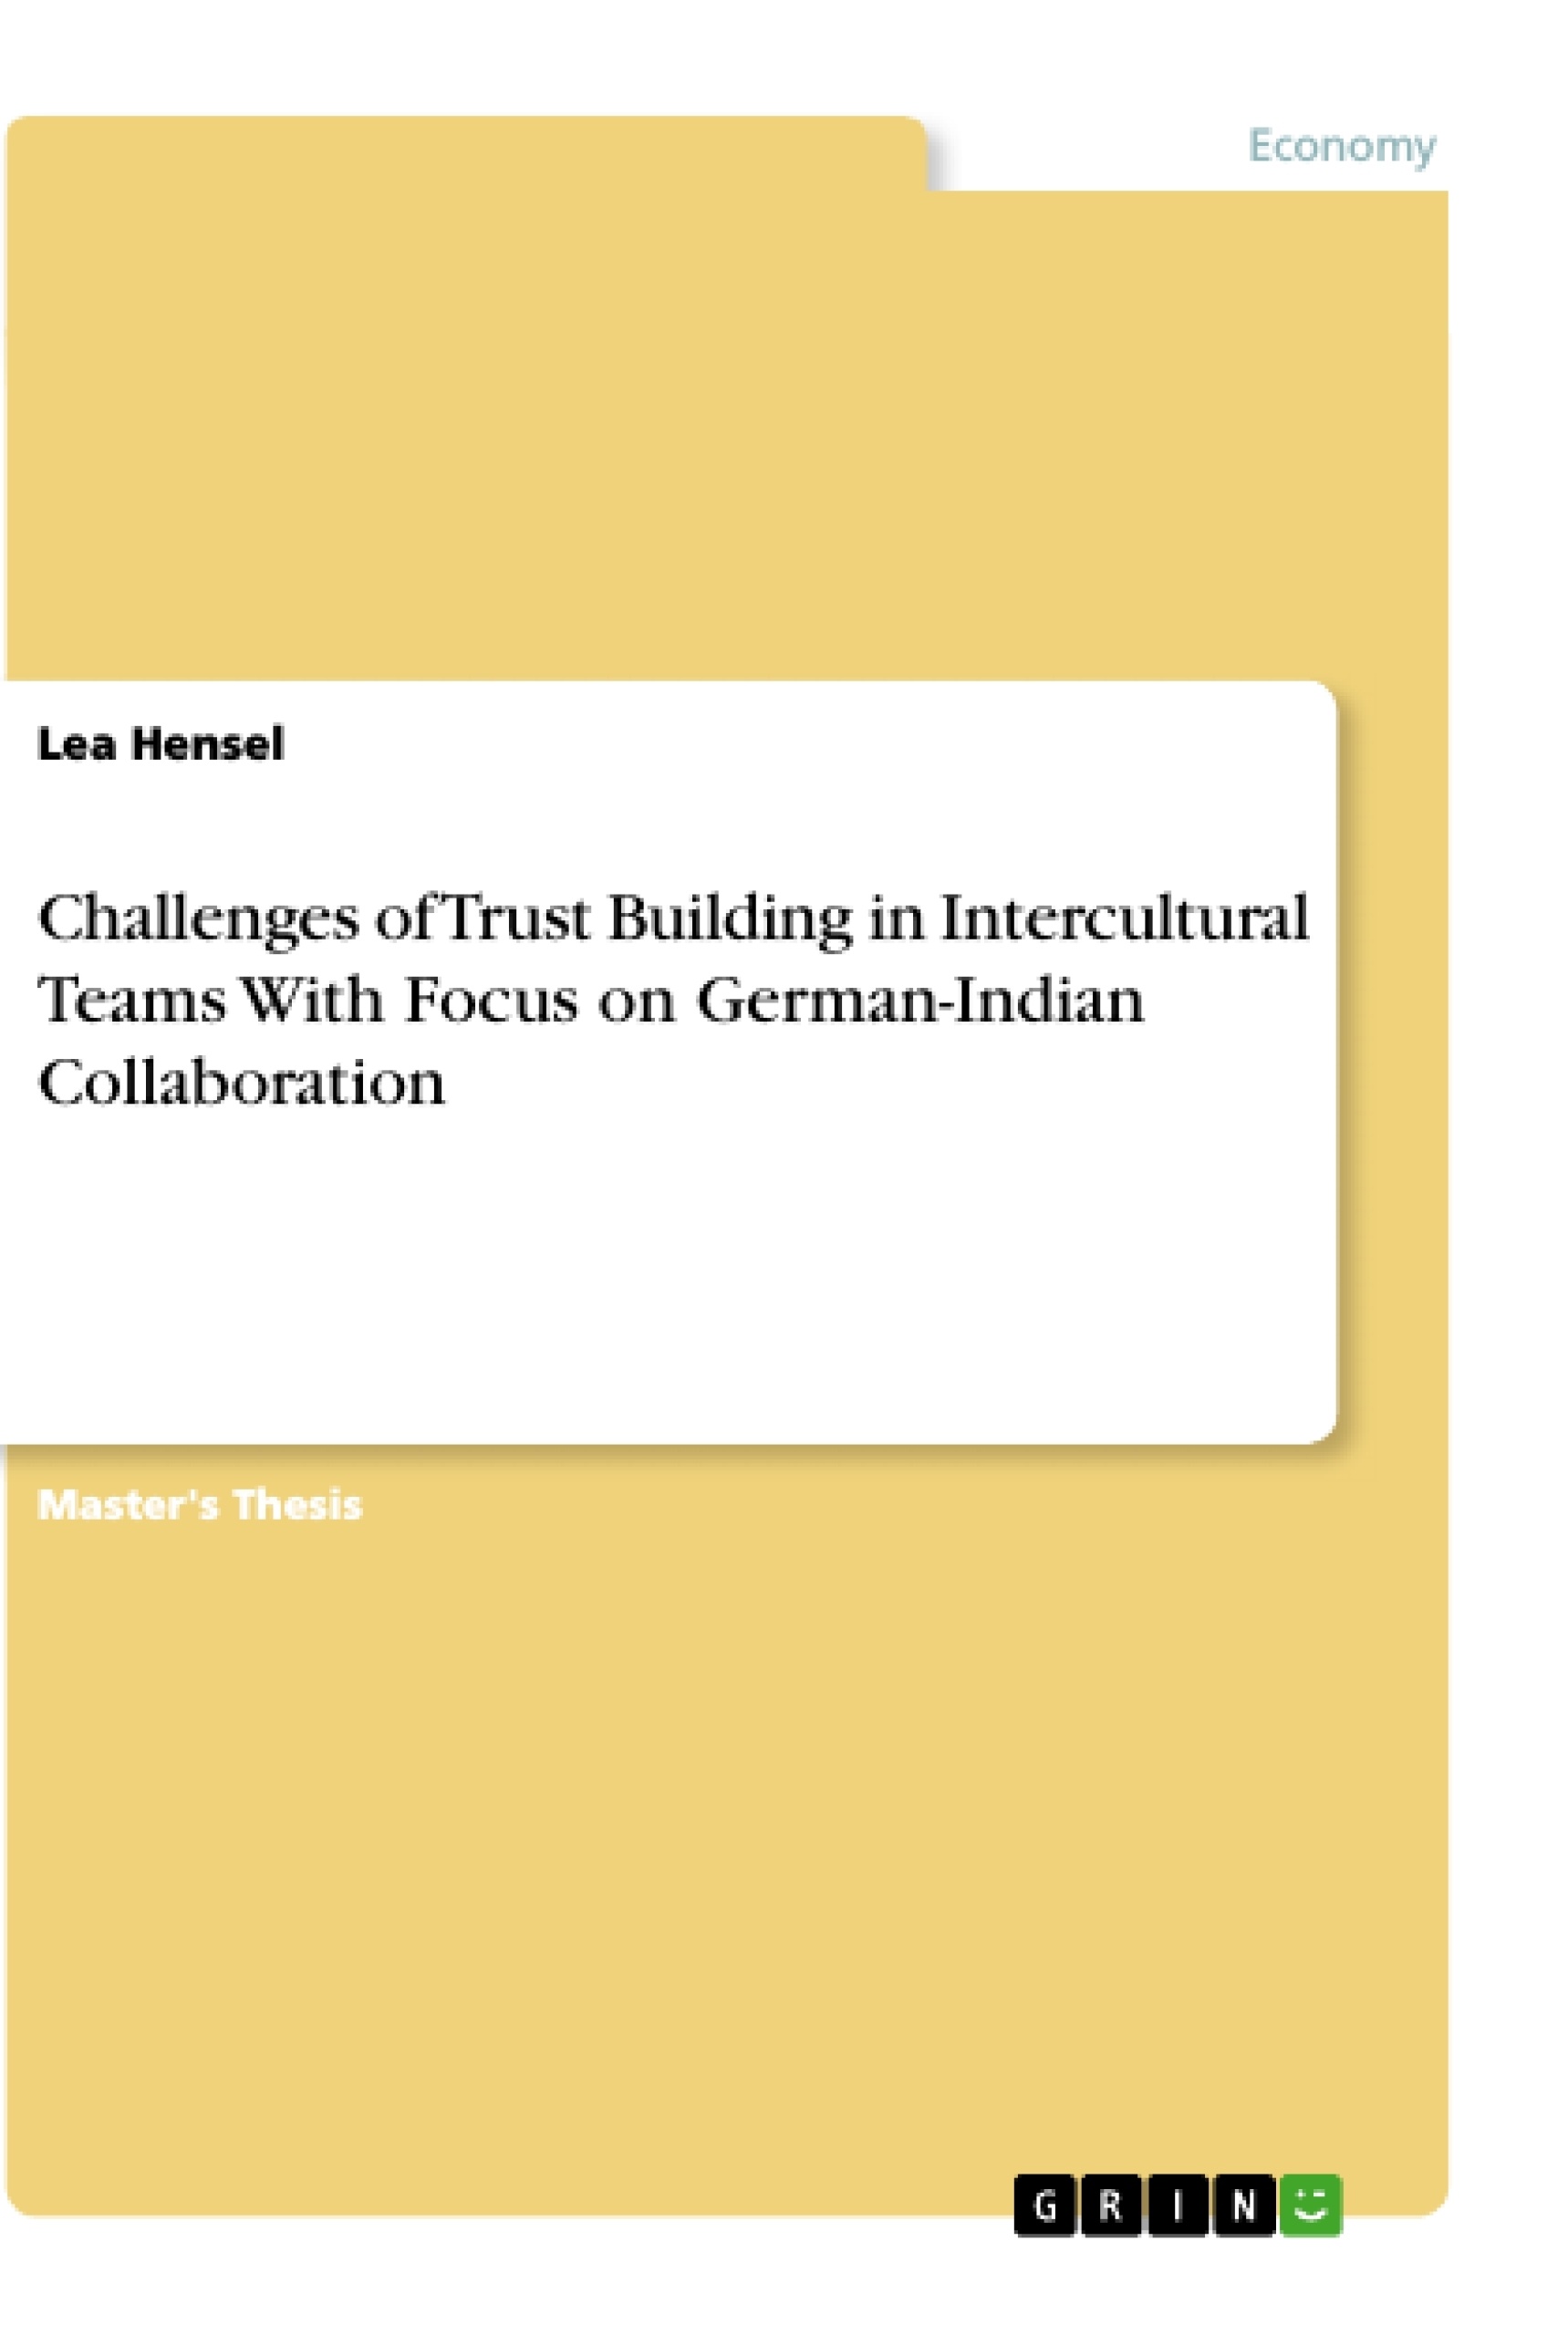 Título: Challenges of Trust Building in Intercultural Teams With Focus on German-Indian Collaboration